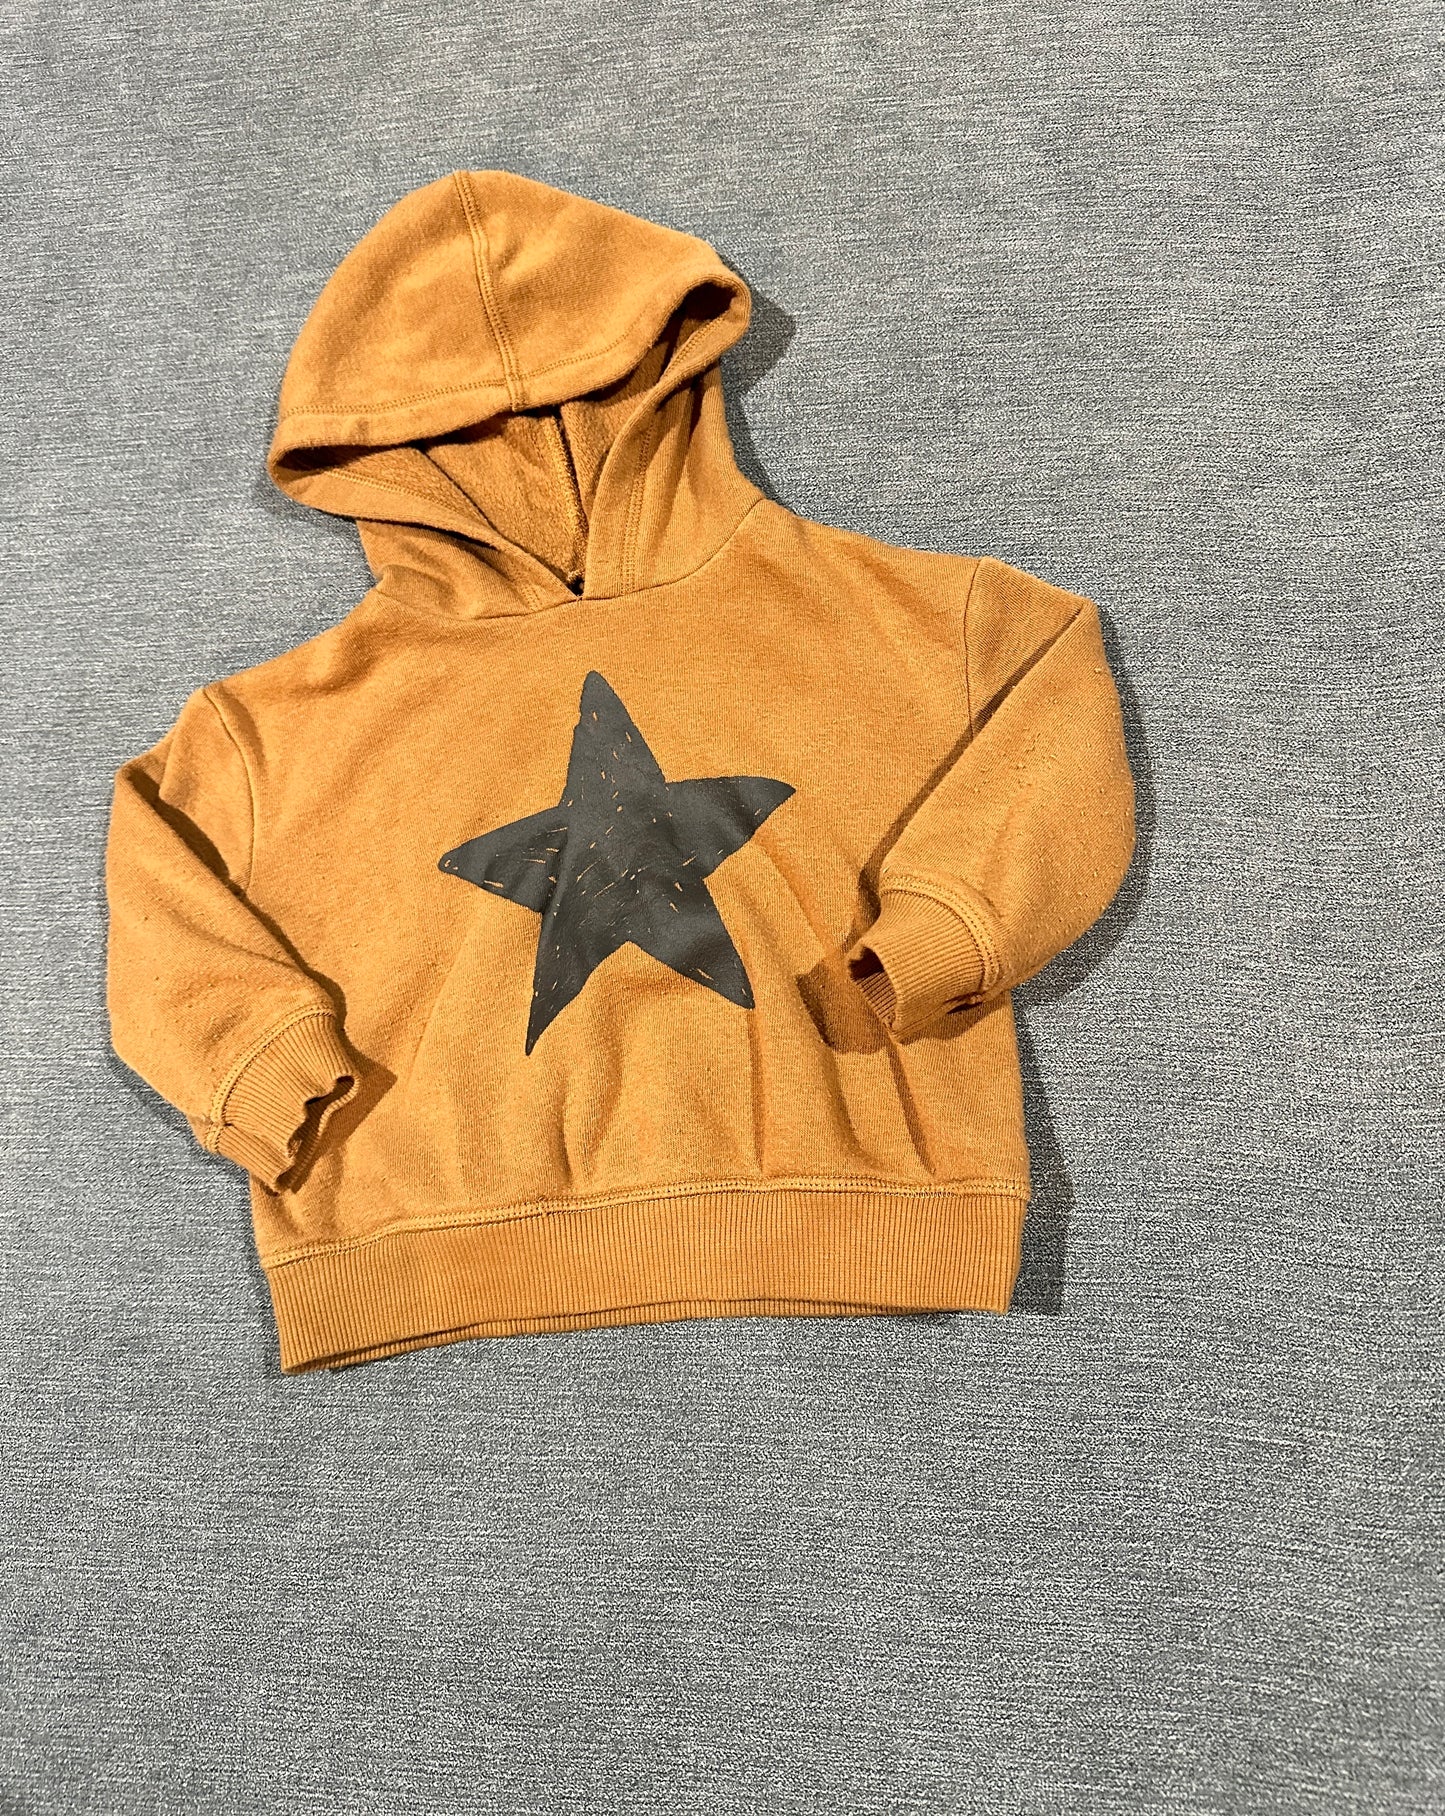 Boys 9 month star hoodie, little co